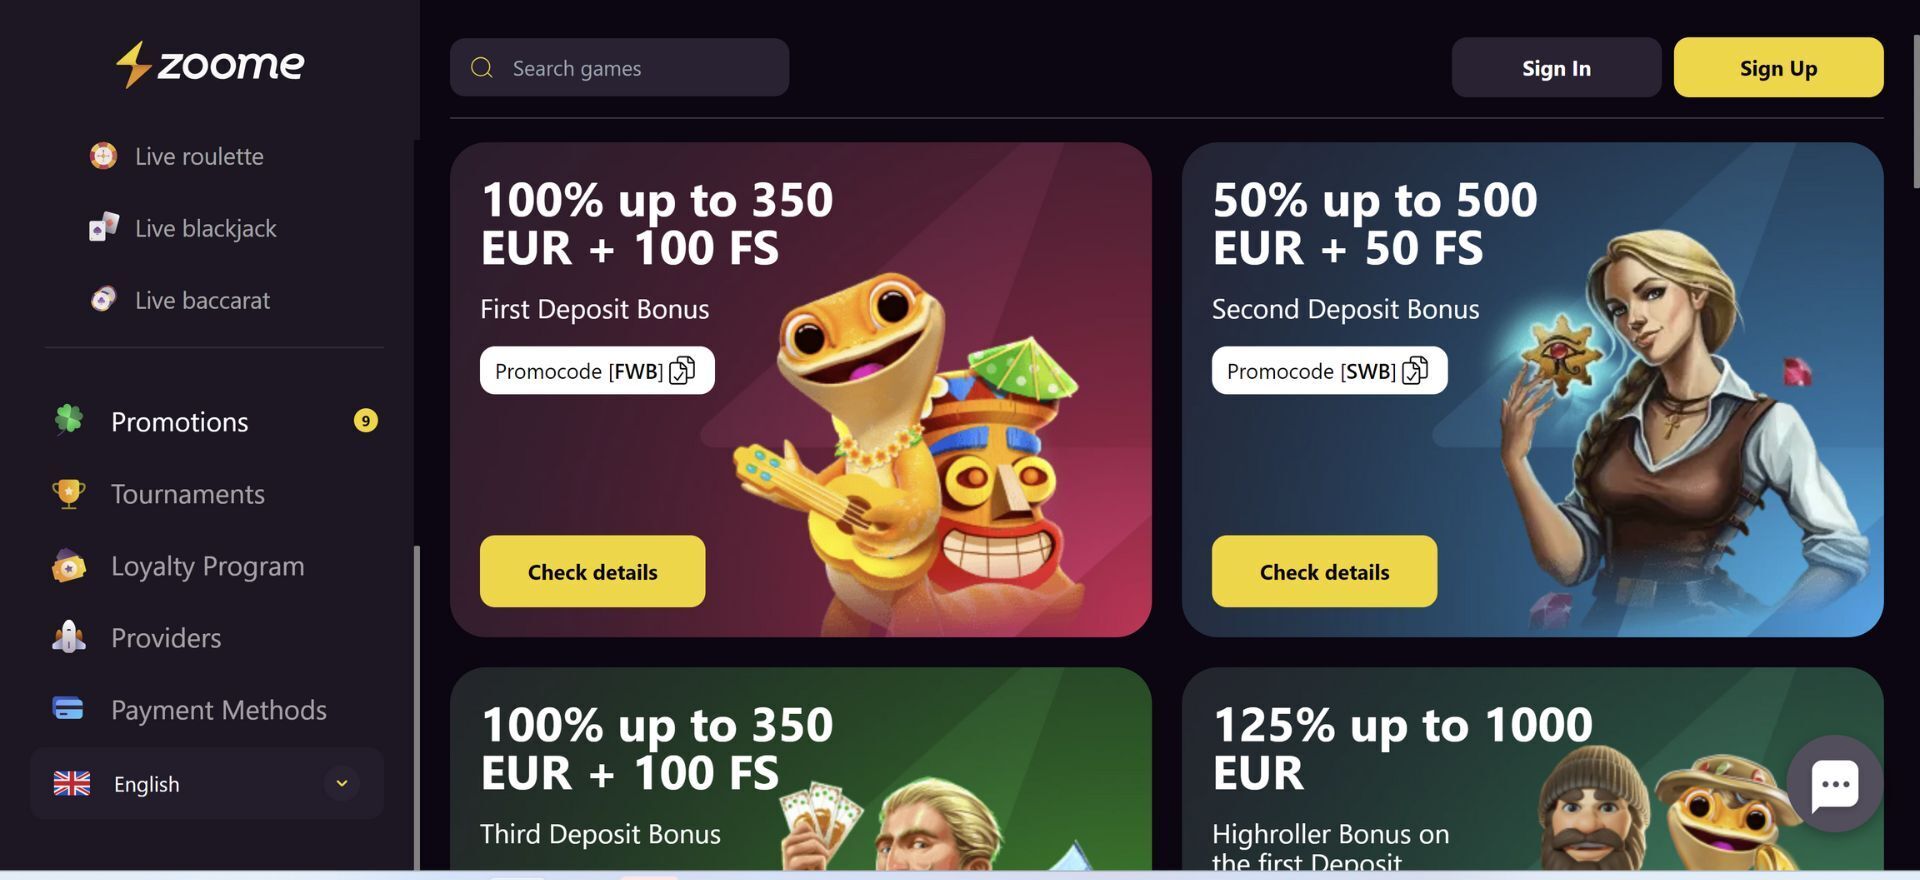 Zoome Casino Promotions